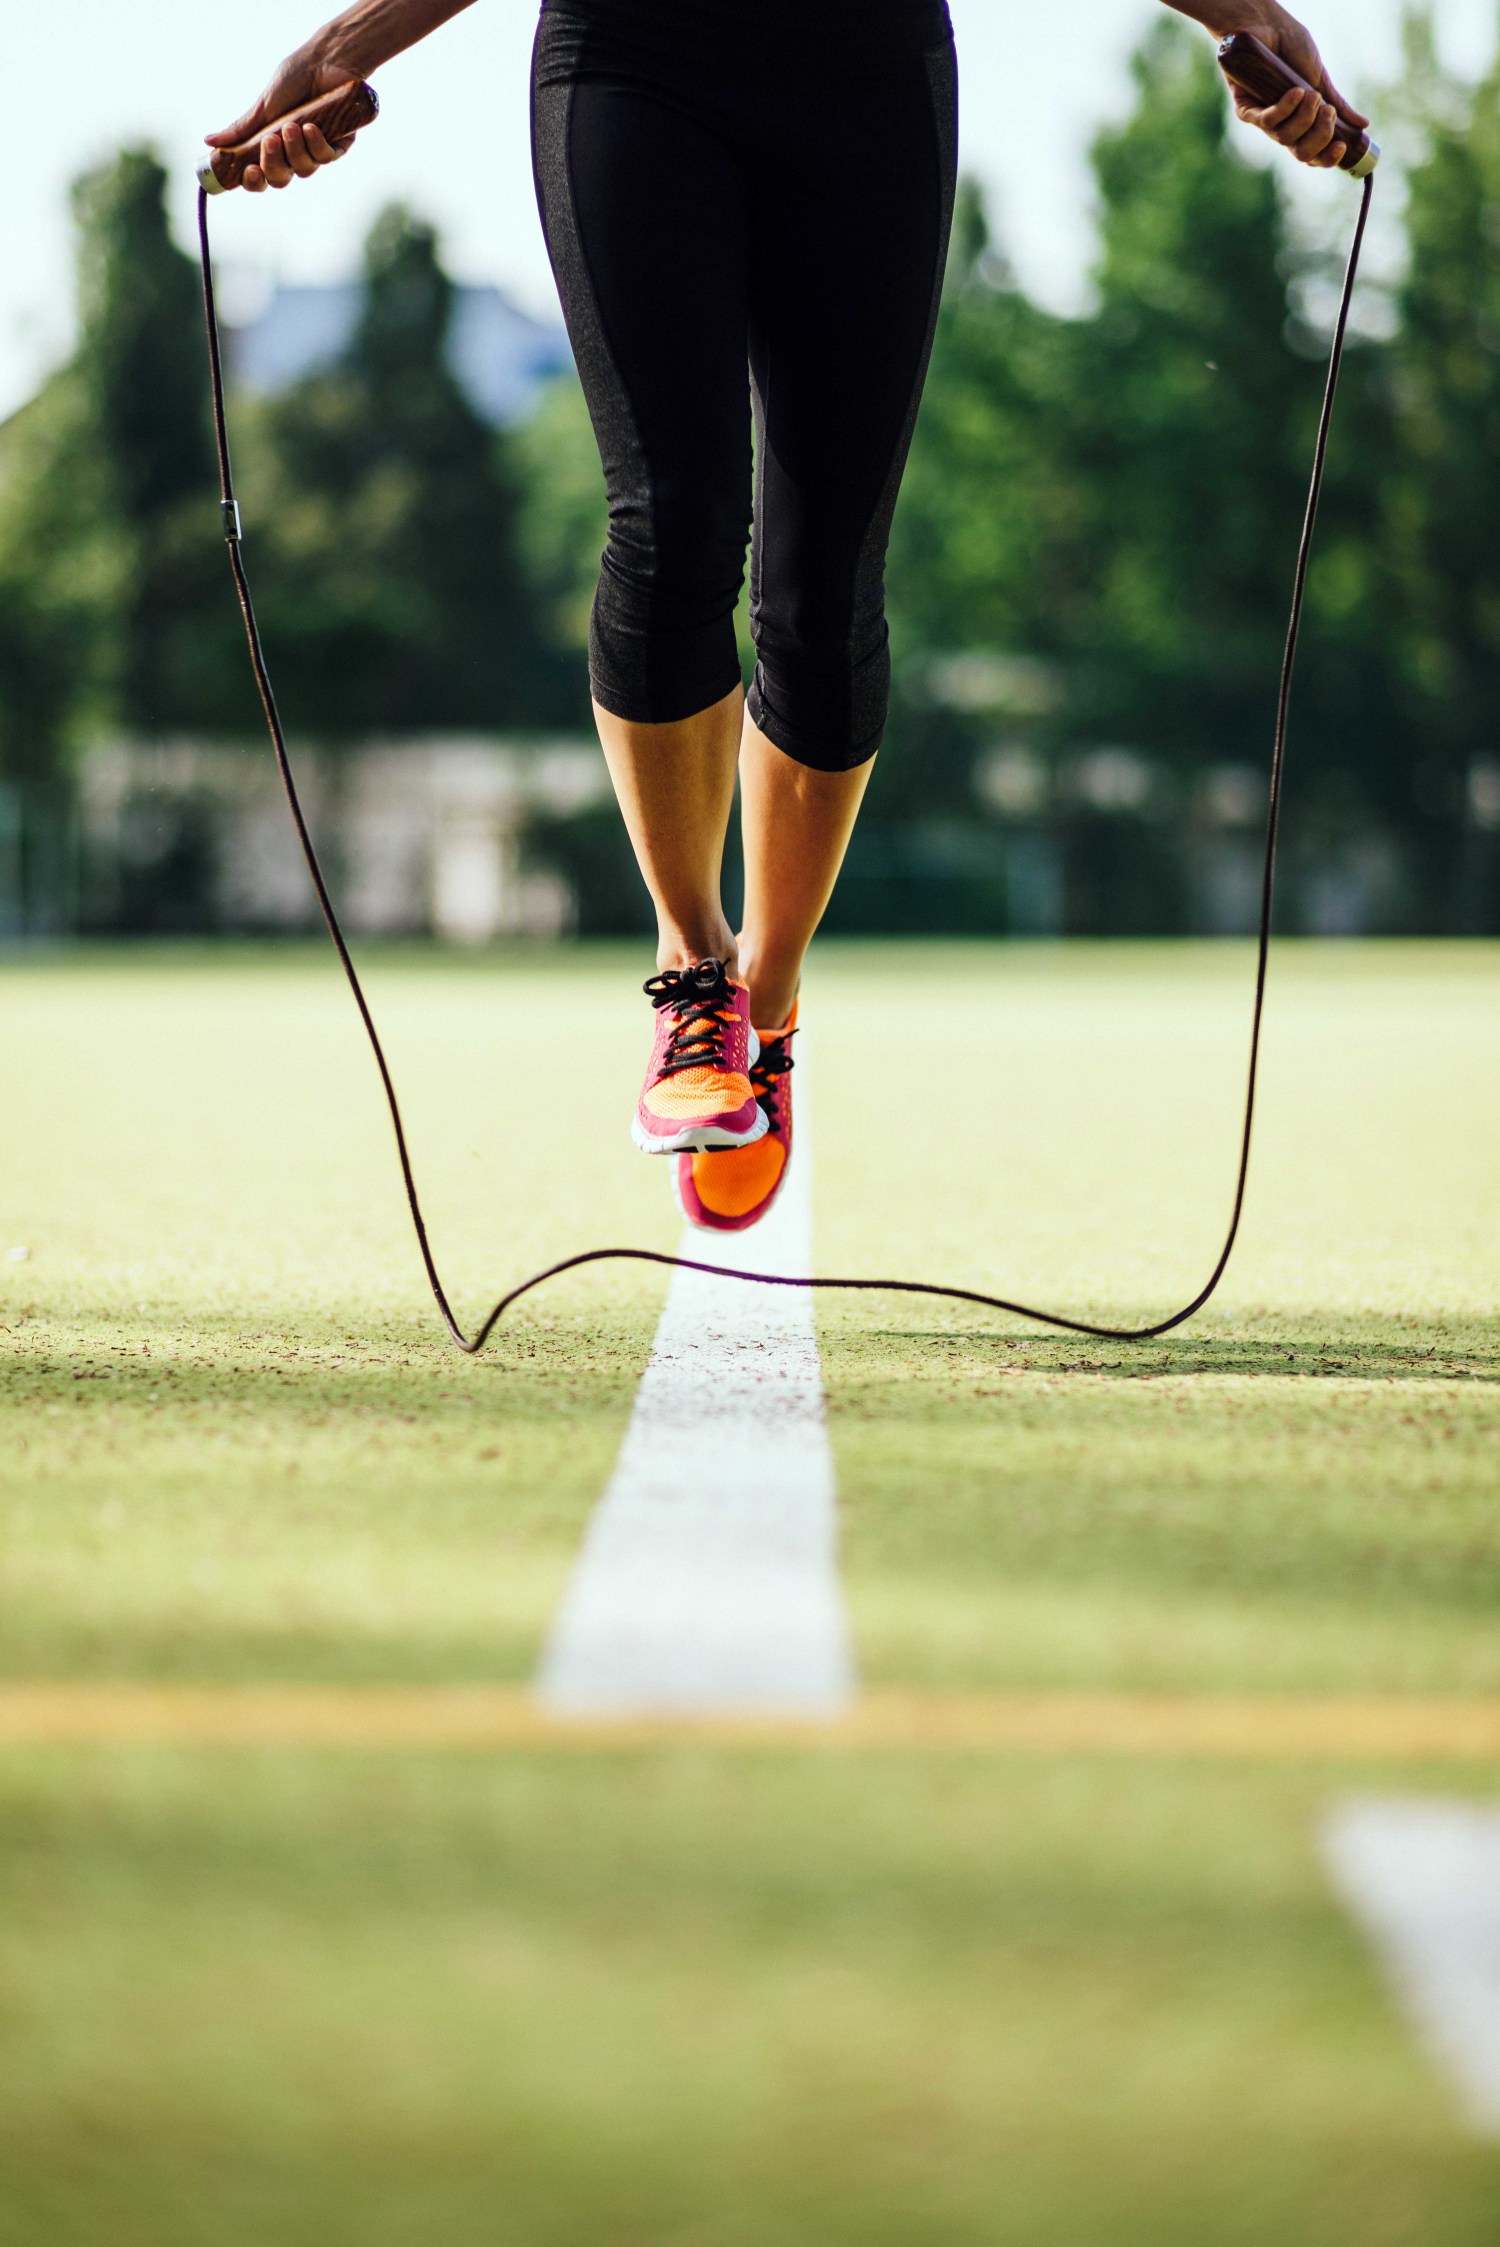 How to Jump Rope for a Great Cardio Workout